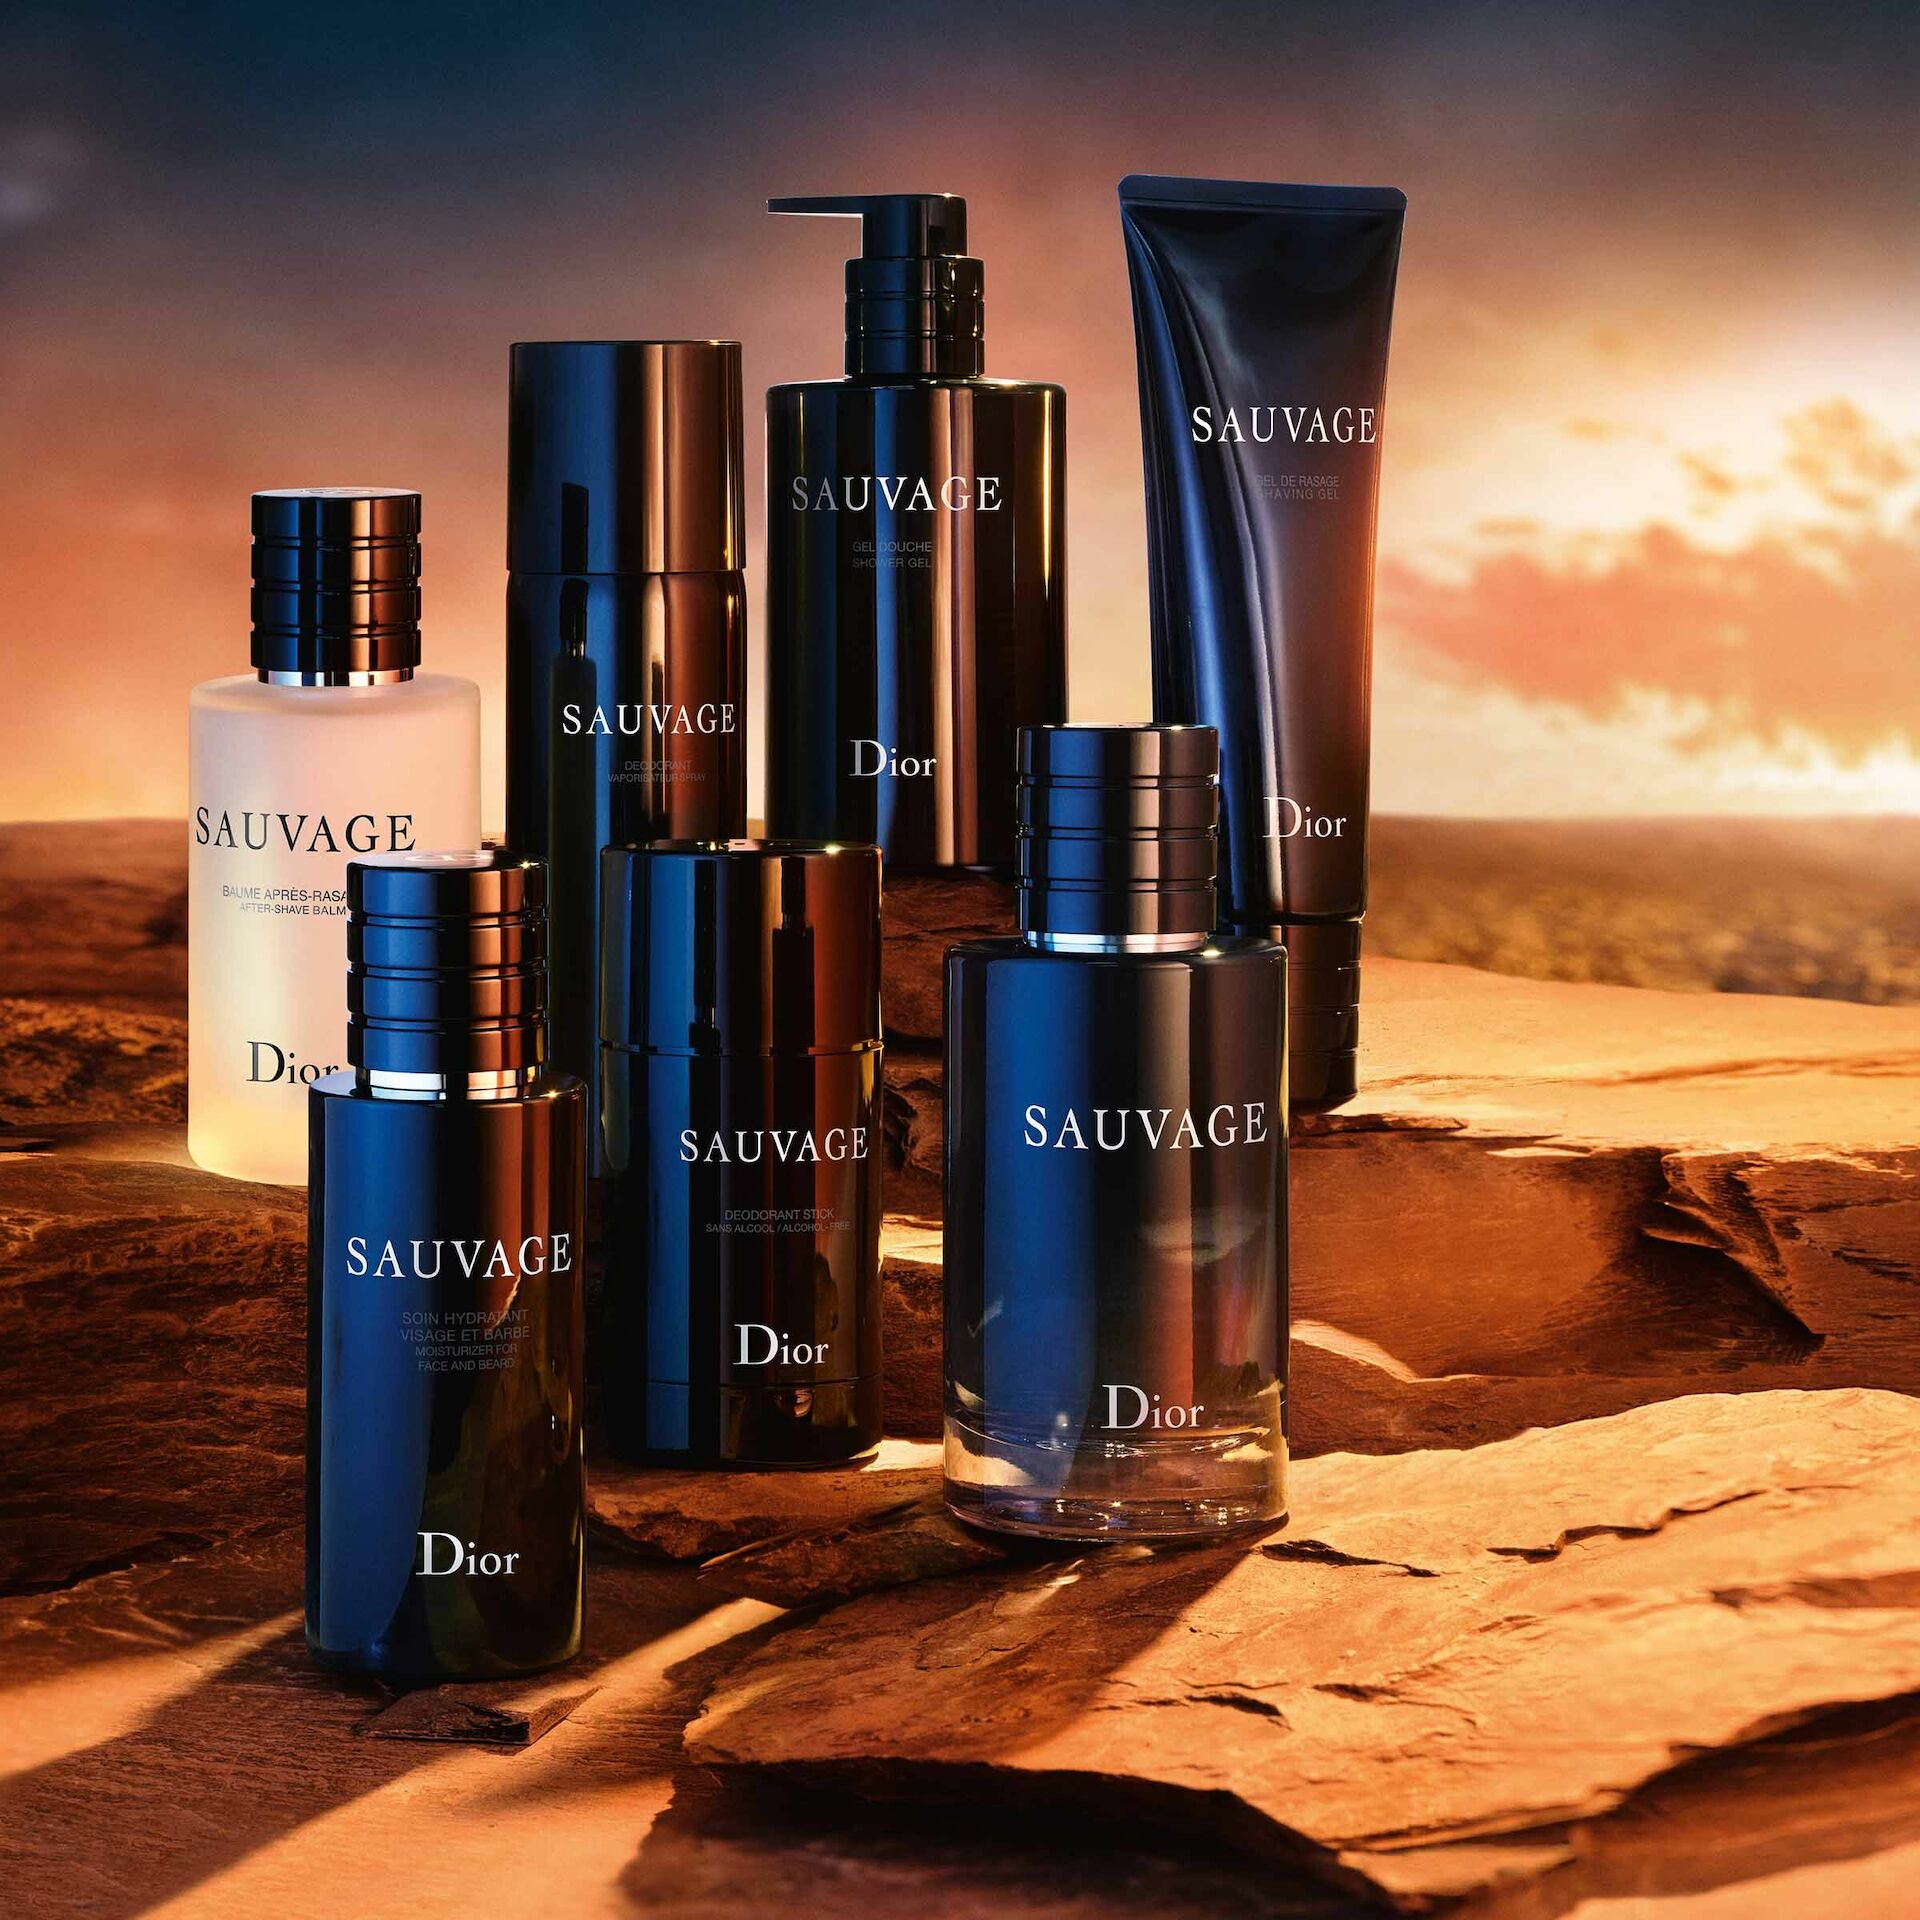 New REFILL 300 ML Dior SAUVAGE Eau de toilette The Sauvage Eau de Toilette  is now refillable Its easytouse ecodesigned refill now allows you  to  By Fake vs Original  Facebook